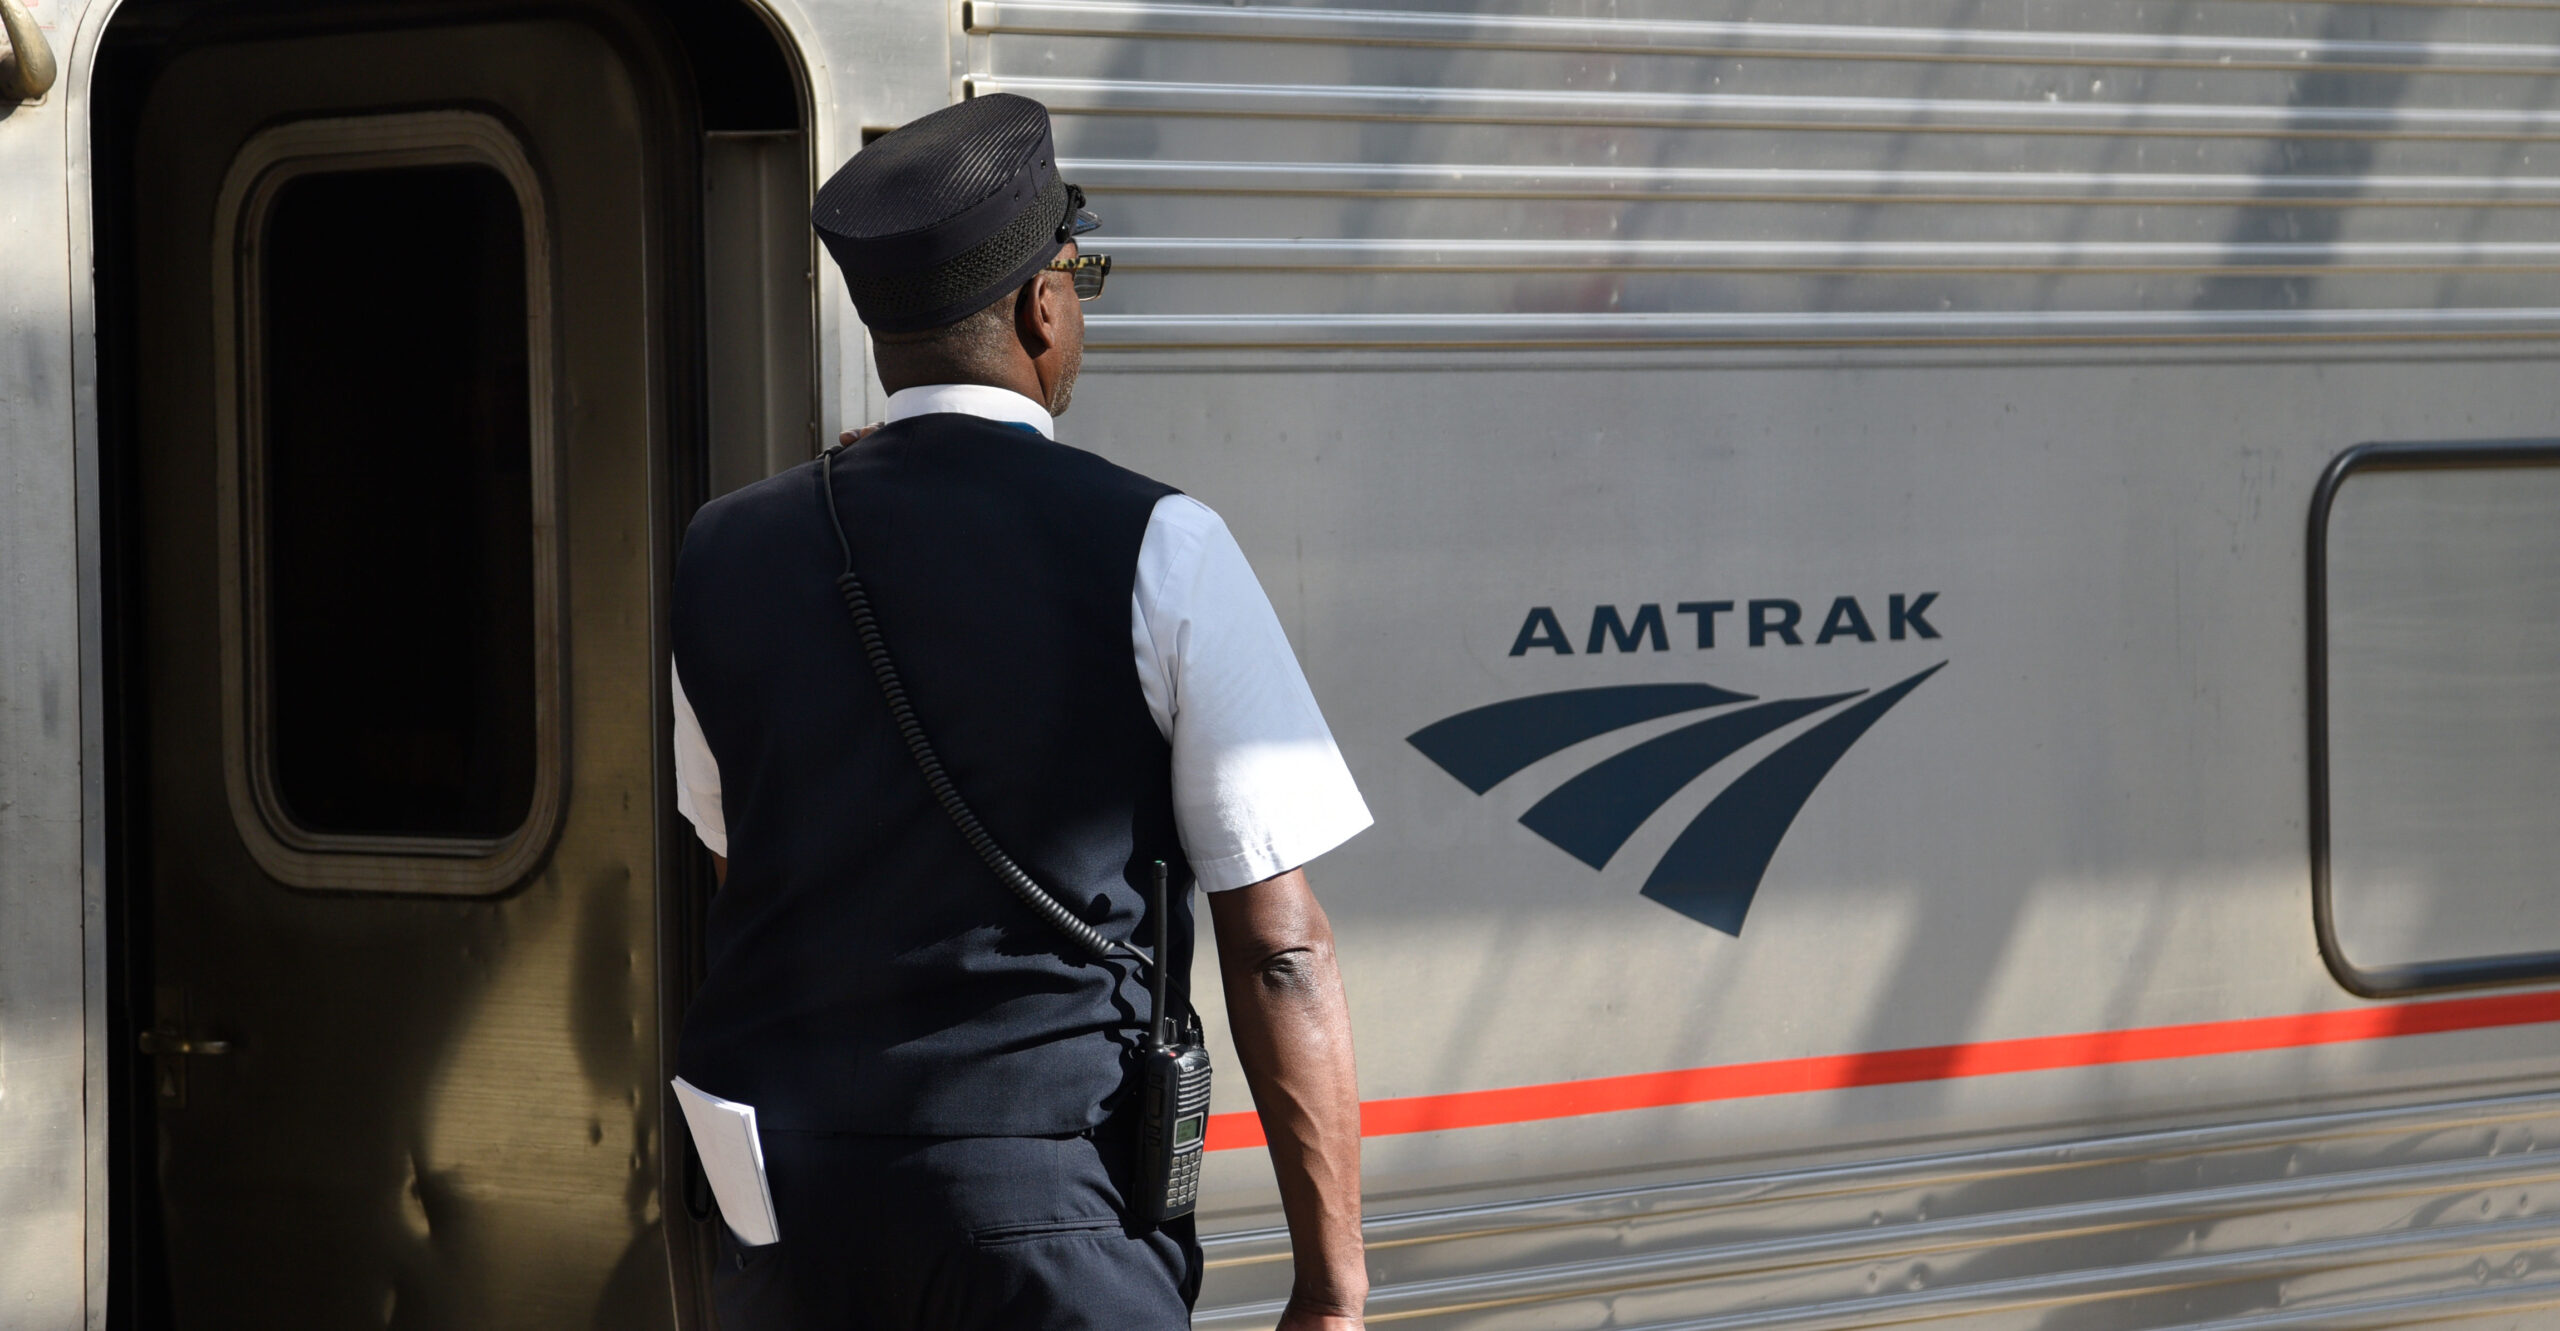 The Great Train Robbery: Taxpayer Subsidies for Amtrak Should Be Derailed